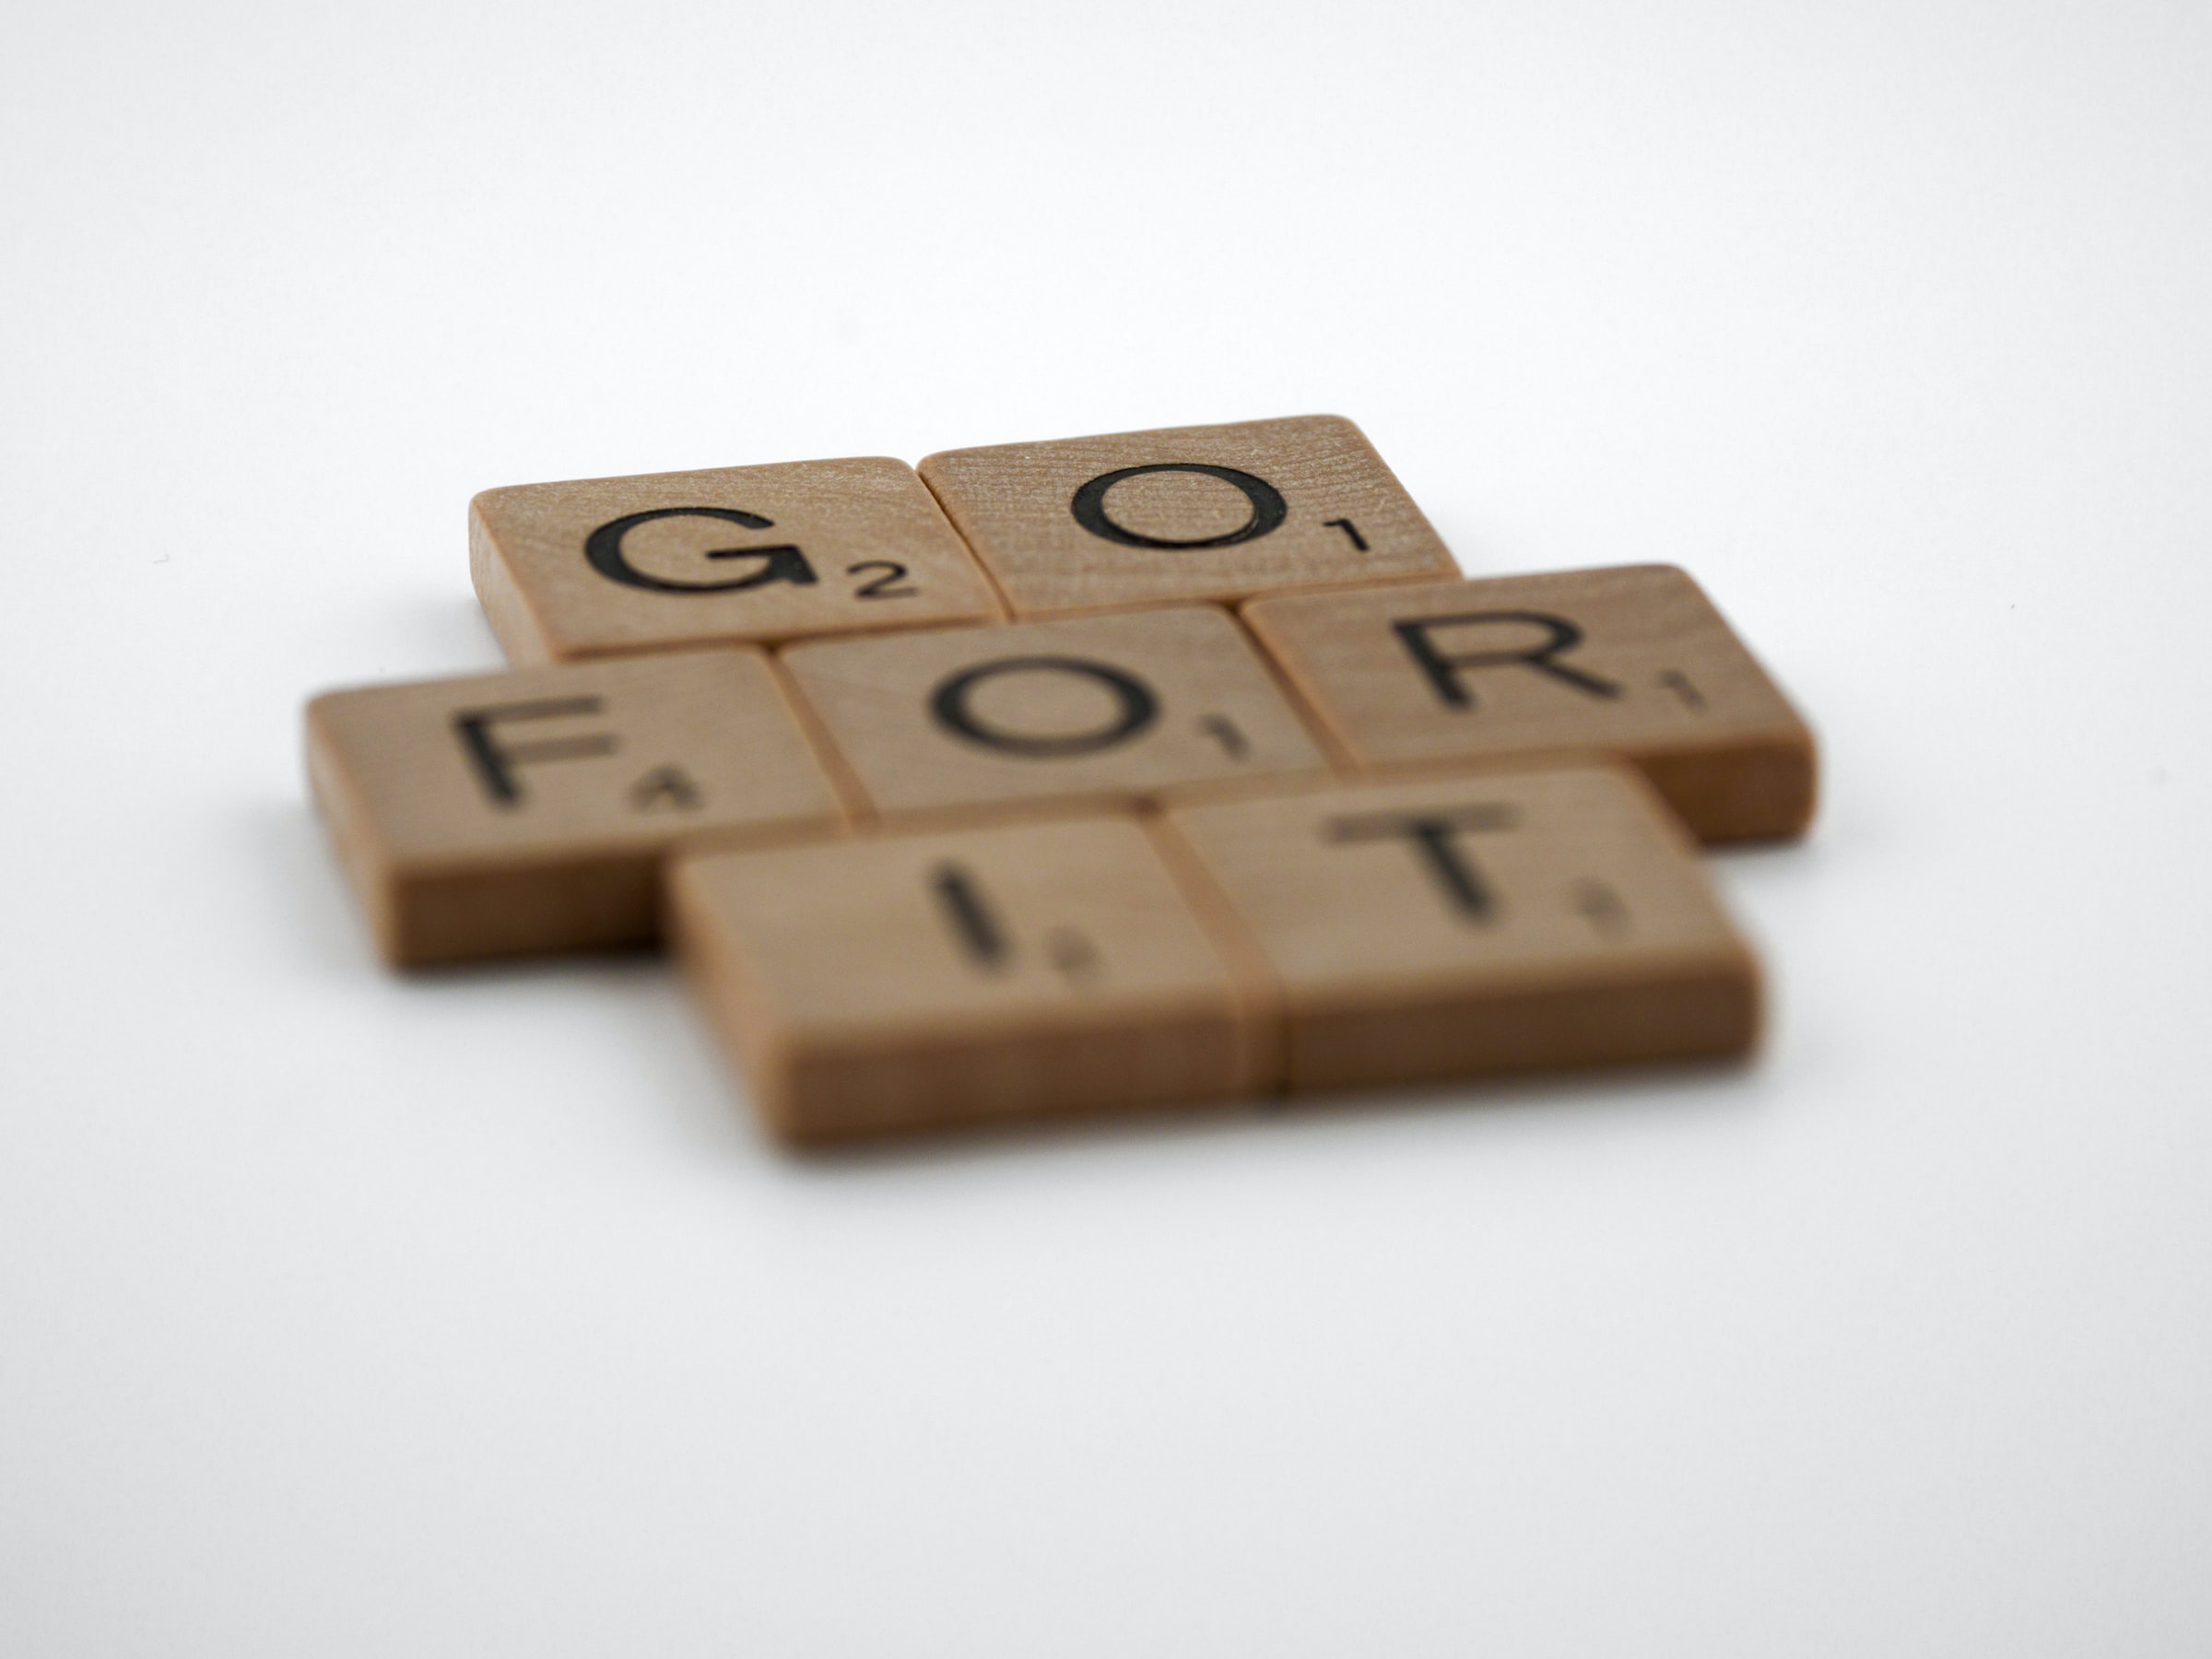 Go for it stock photo blog featured (JPEG, 2400 × 1800)